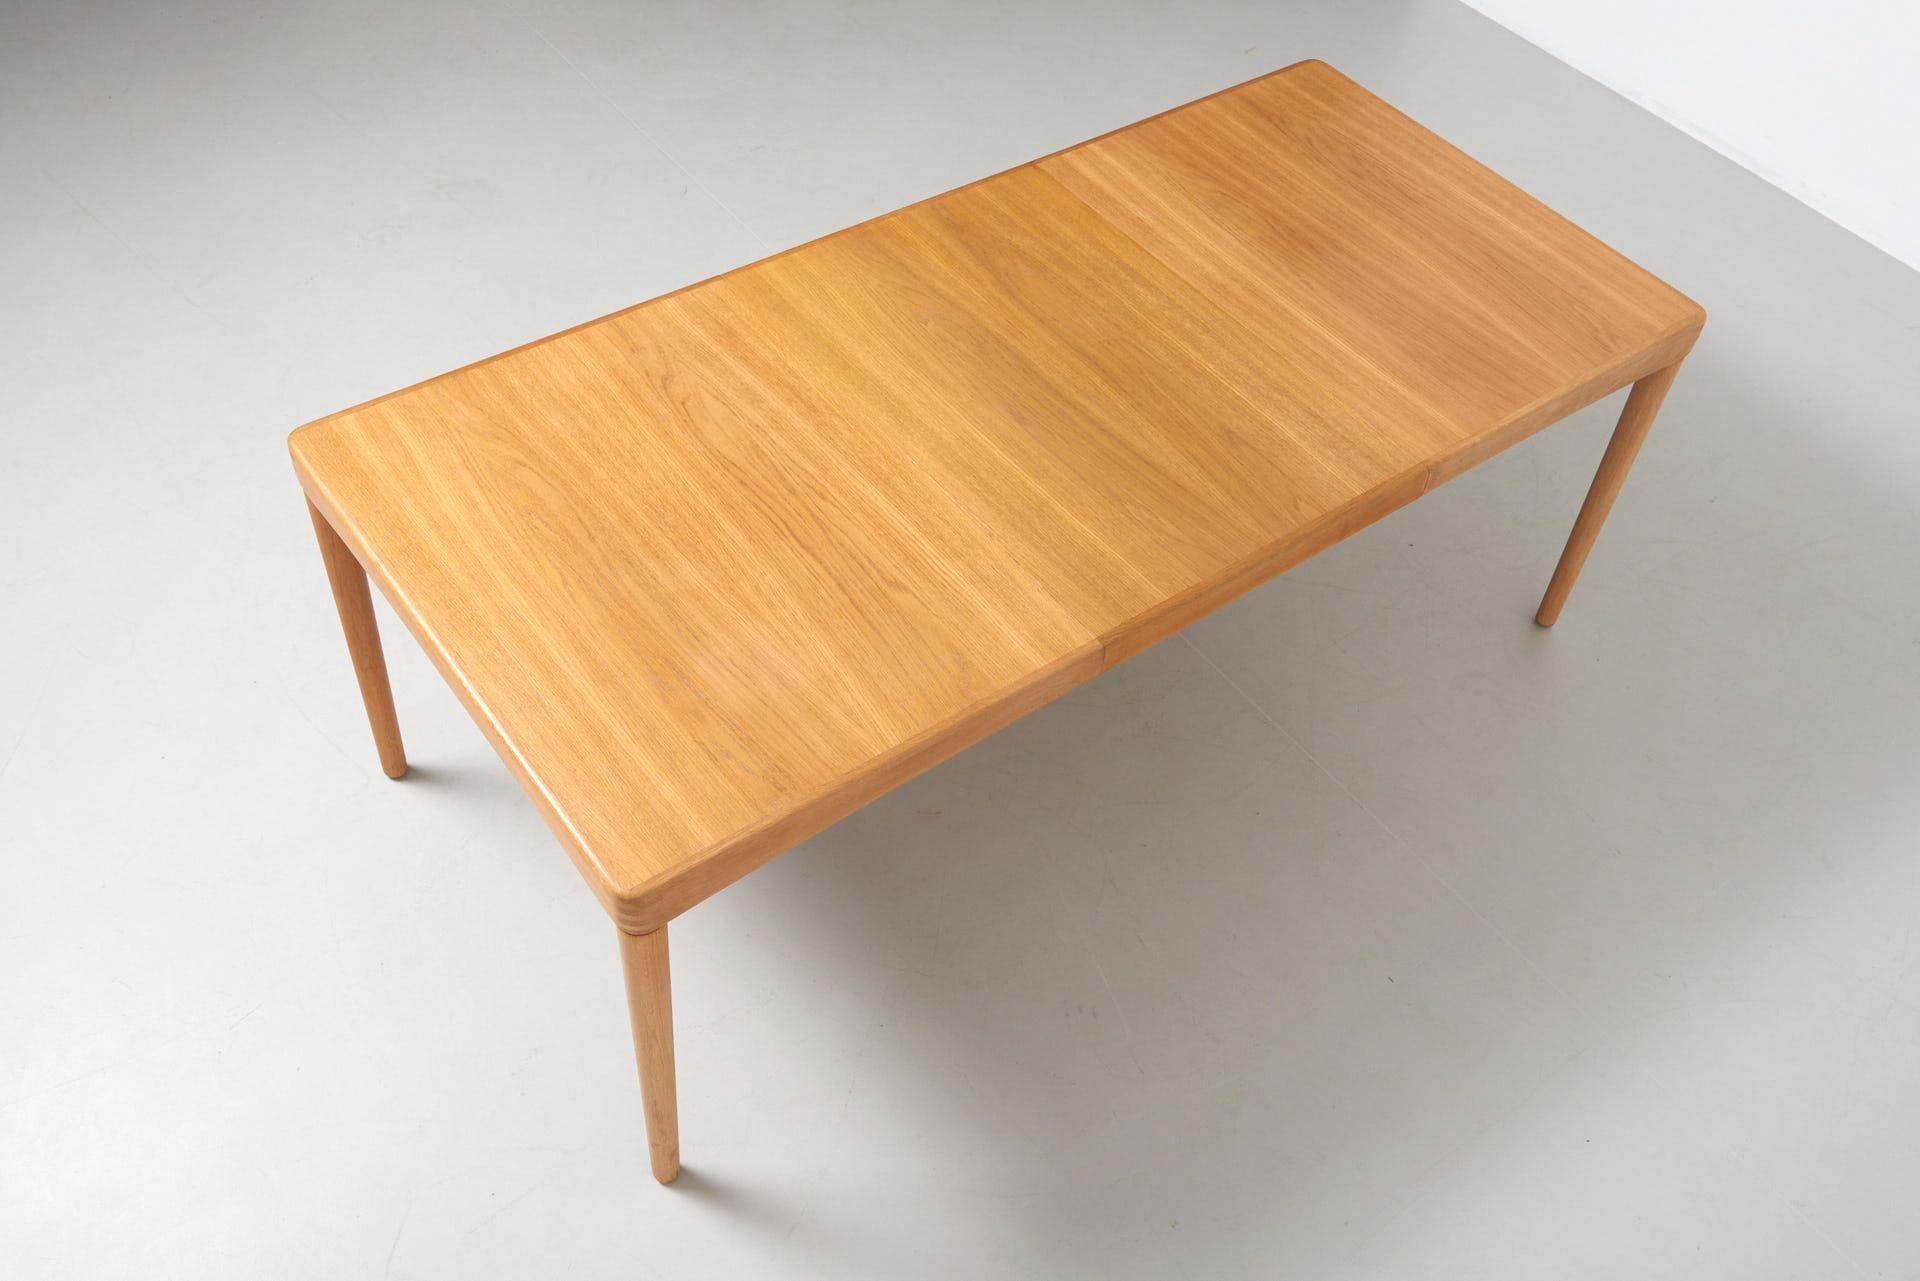 An elegant dining table in oak with 1 extension leaf of 60cm. When the extension is not being used, it can be stored inside the table. When in use, it follows beautifully the lines of the table. The corners feature three stripes, a signature of the